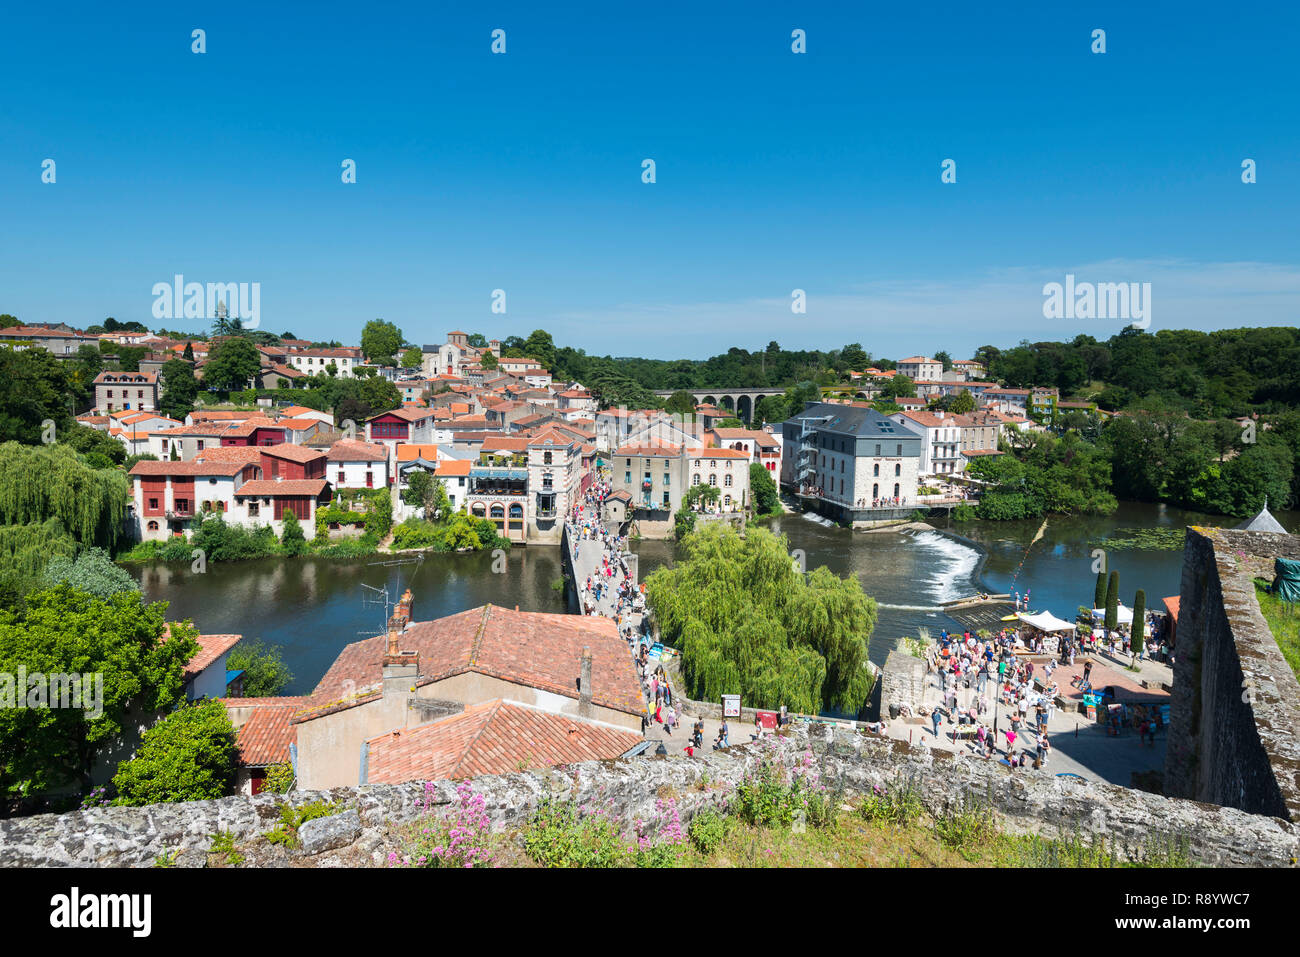 Clisson (north-western France). Real estate, properties in the district of St Antoine on the banks of the Sevre river *** Local Caption *** Stock Photo